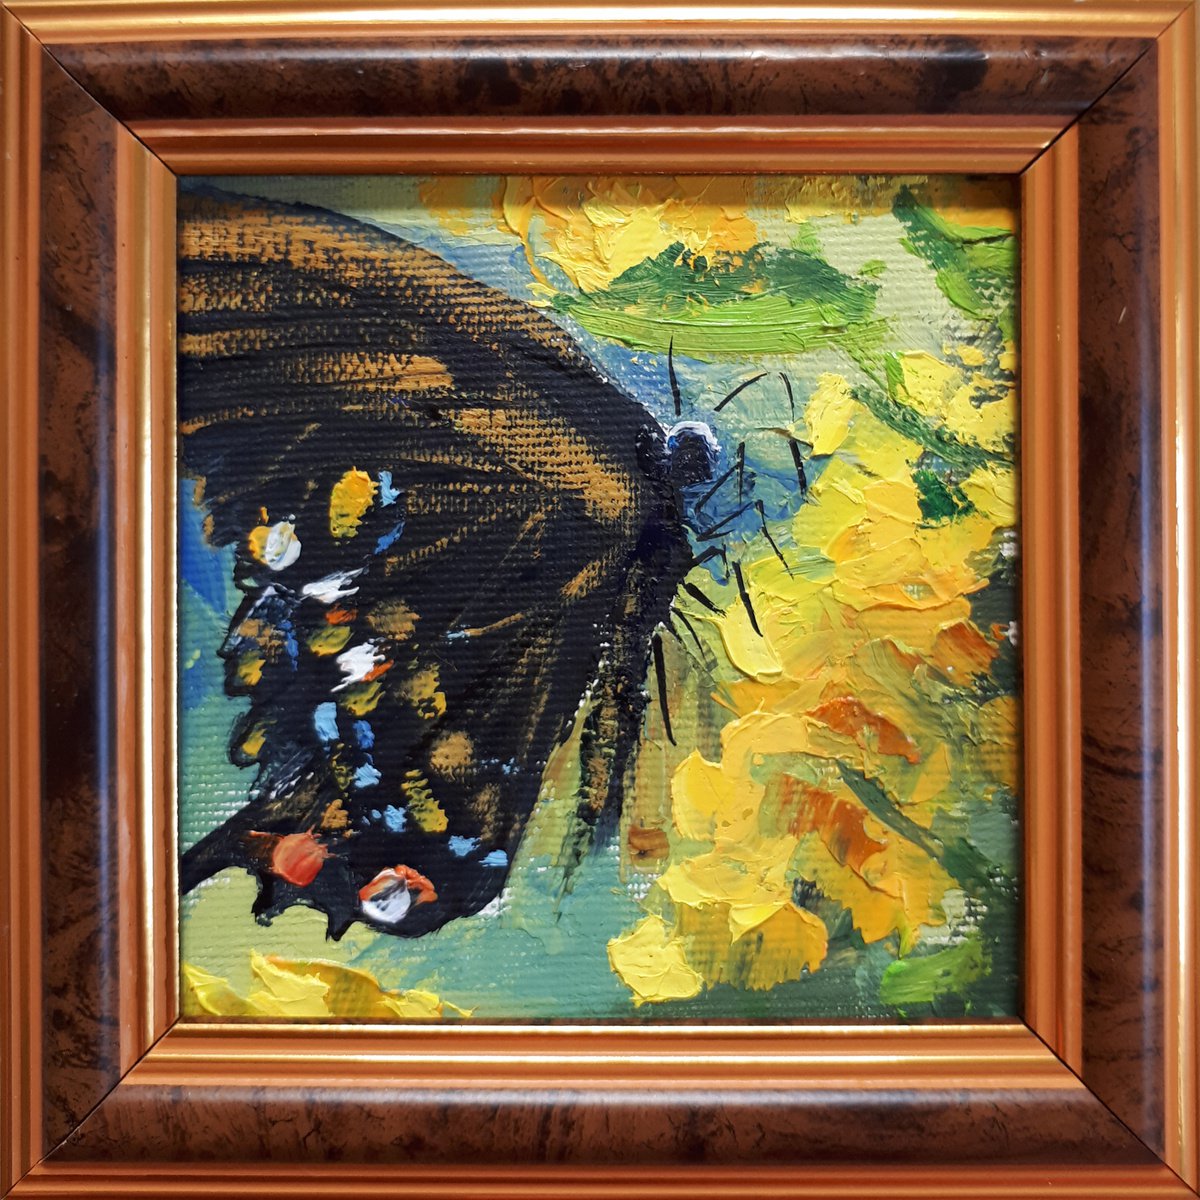 Butterfly #1 in frame / FROM MY A SERIES OF MINI WORKS / ORIGINAL OIL PAINTING by Salana Art Gallery